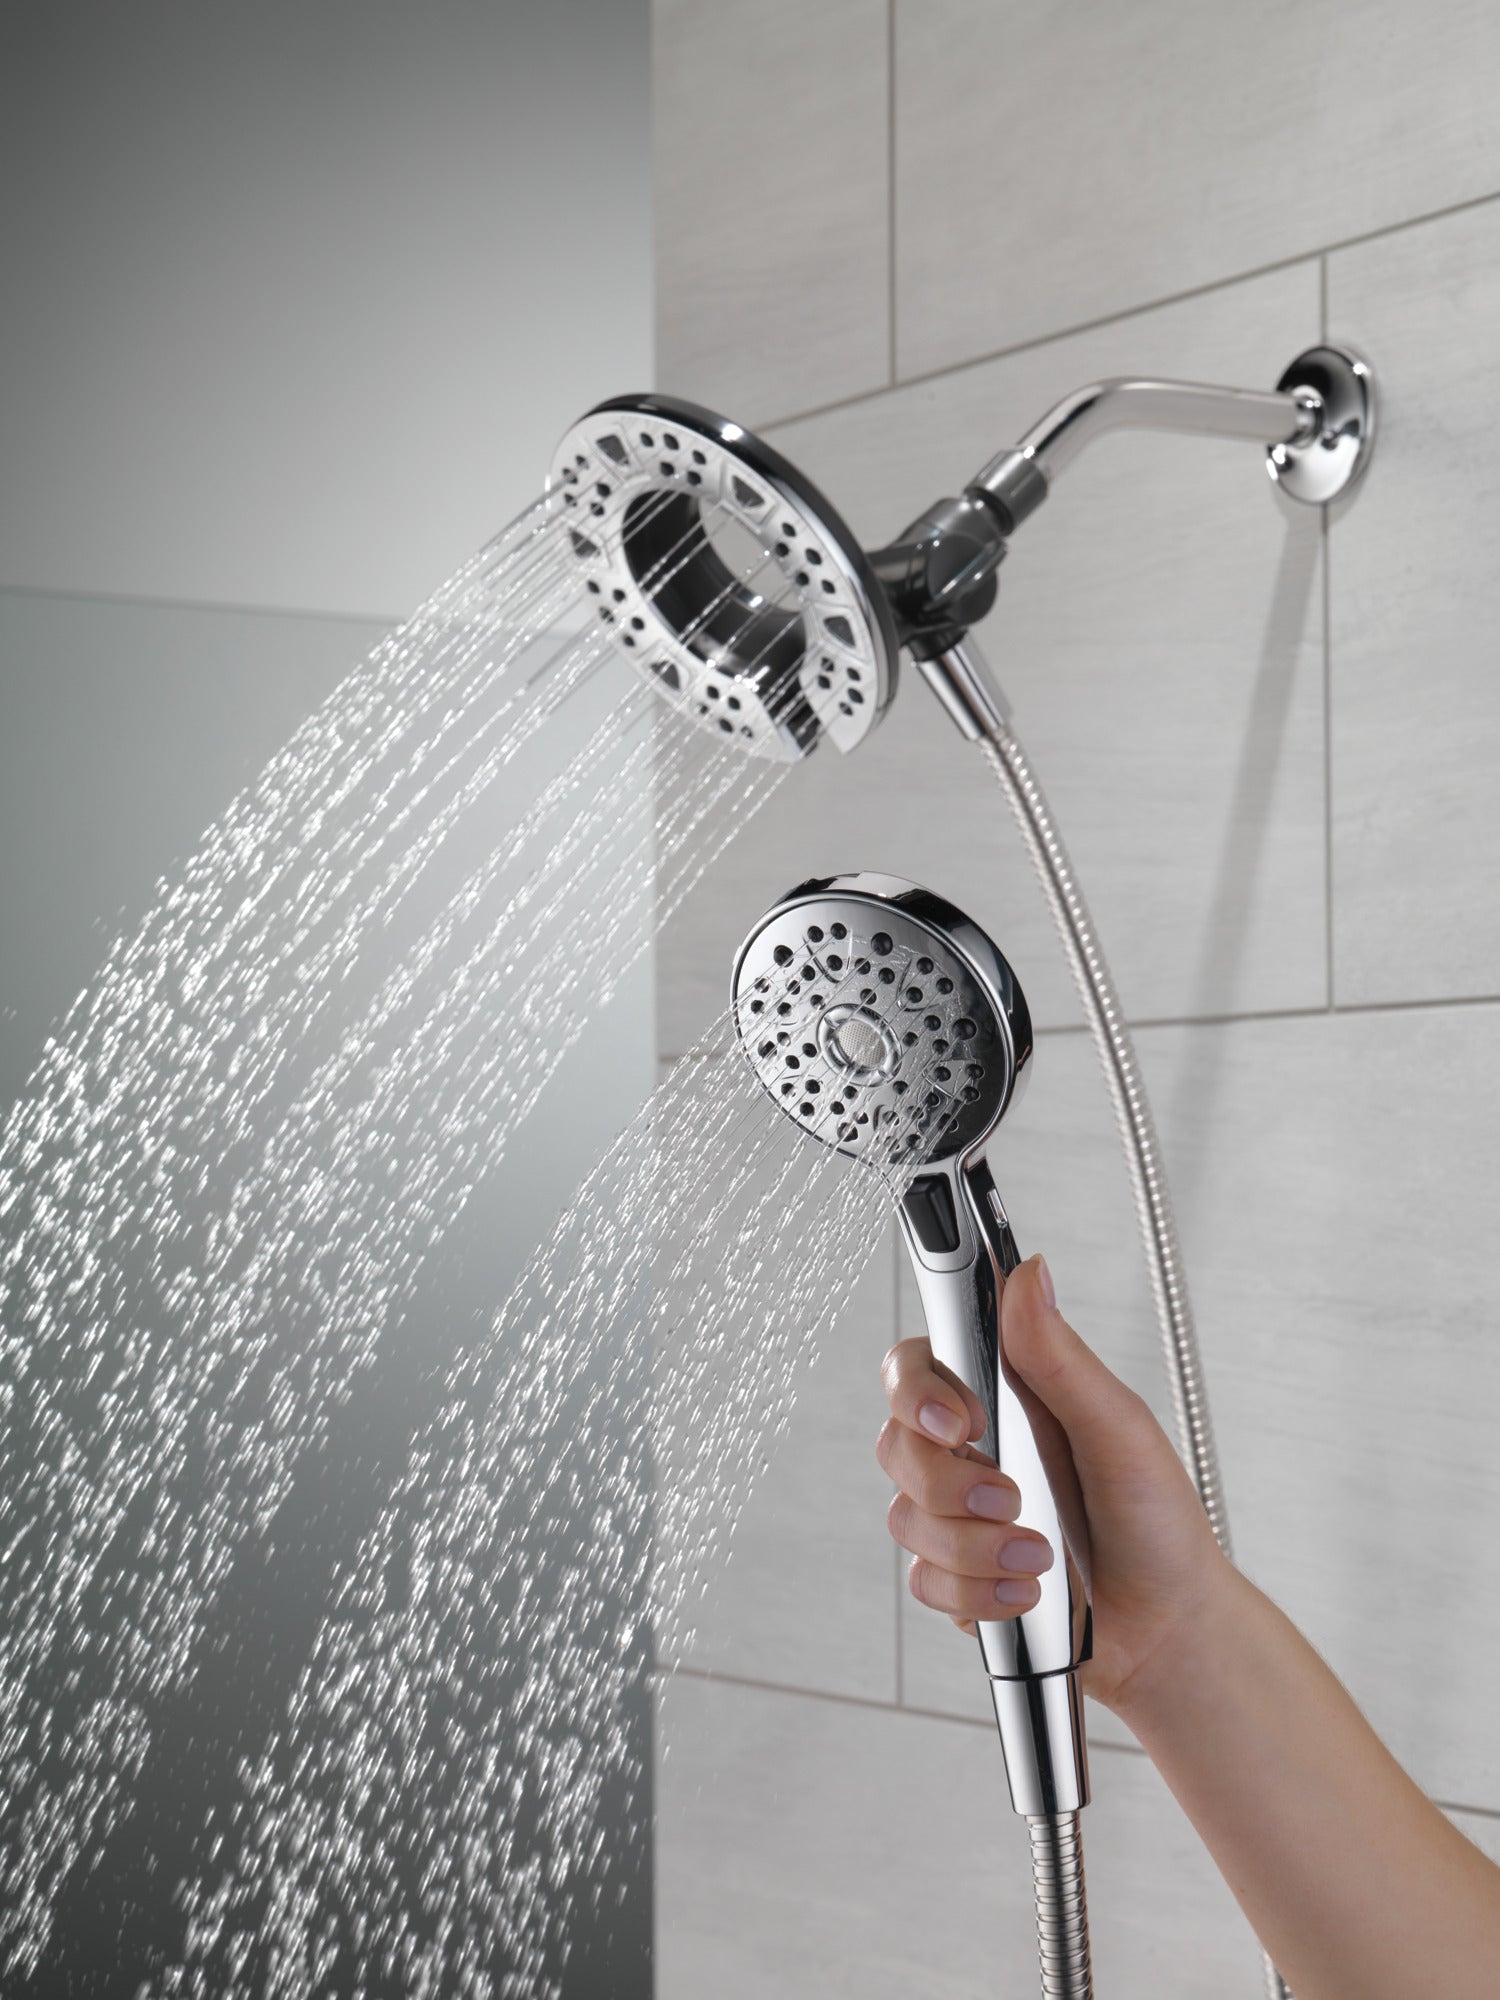 Delta In2ition 1.75 GPM Handshower 4-Setting Certified Refurbished